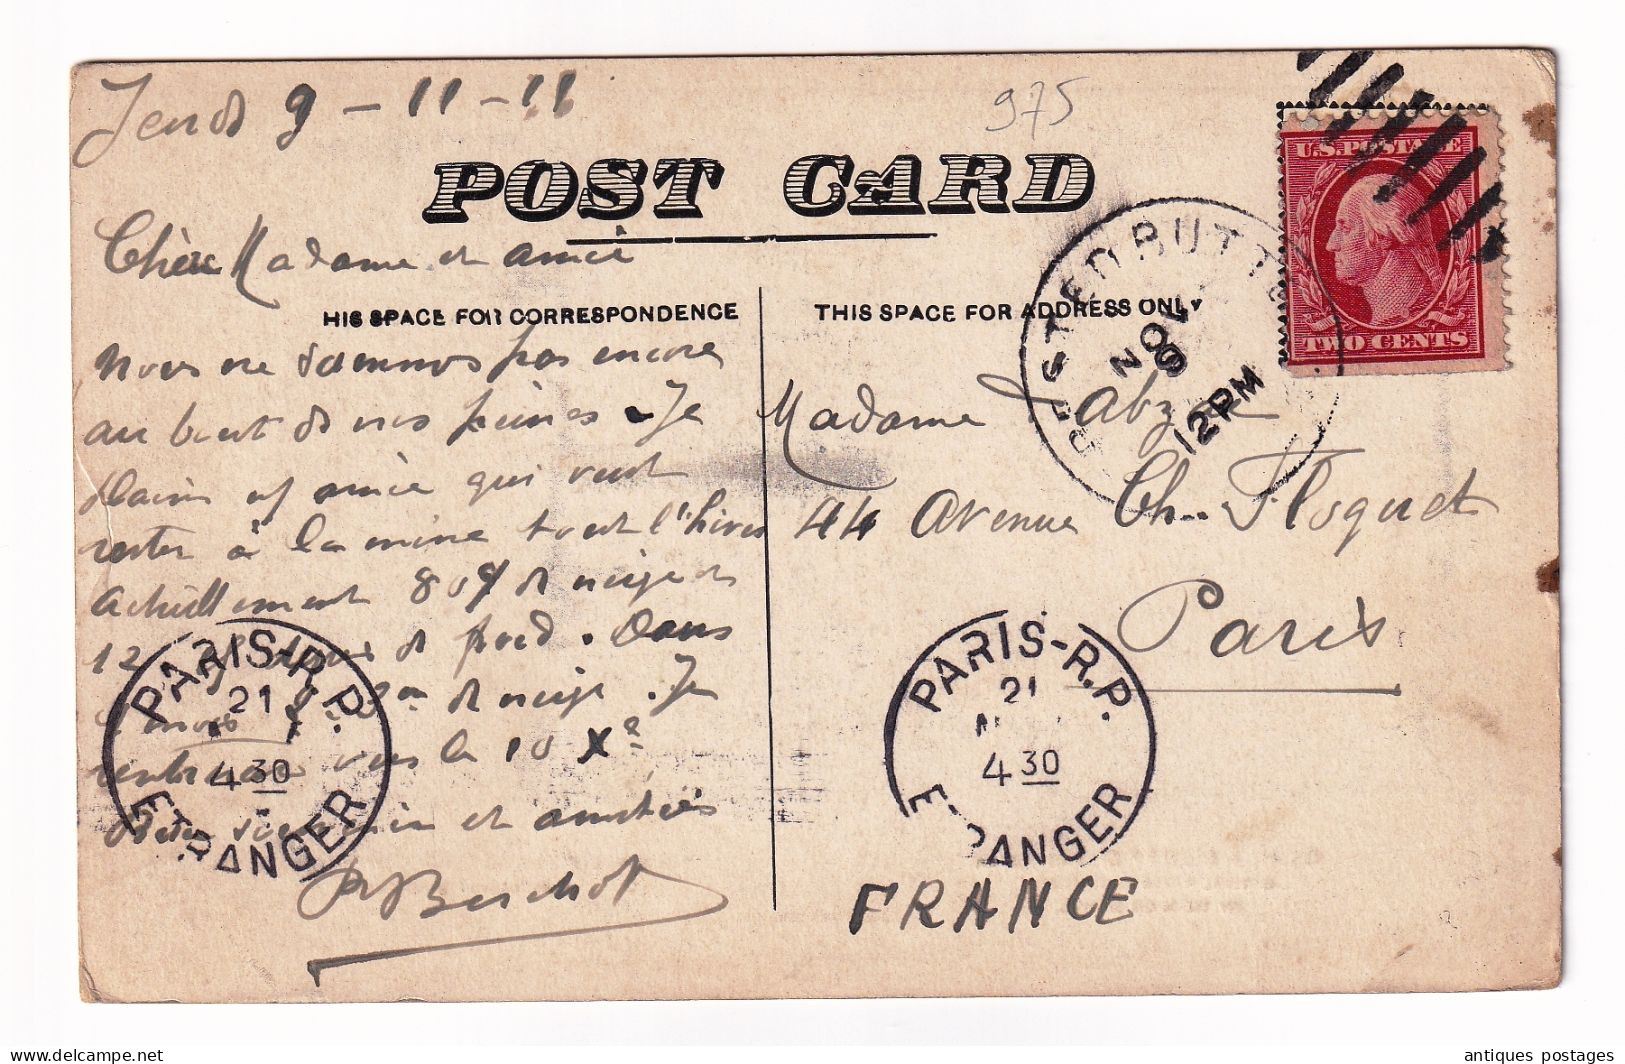 Post Card 1911 Crested Butte Colorado Elk Mountain House Hubbard USA Paris France Two Cents Red Washington - Lettres & Documents